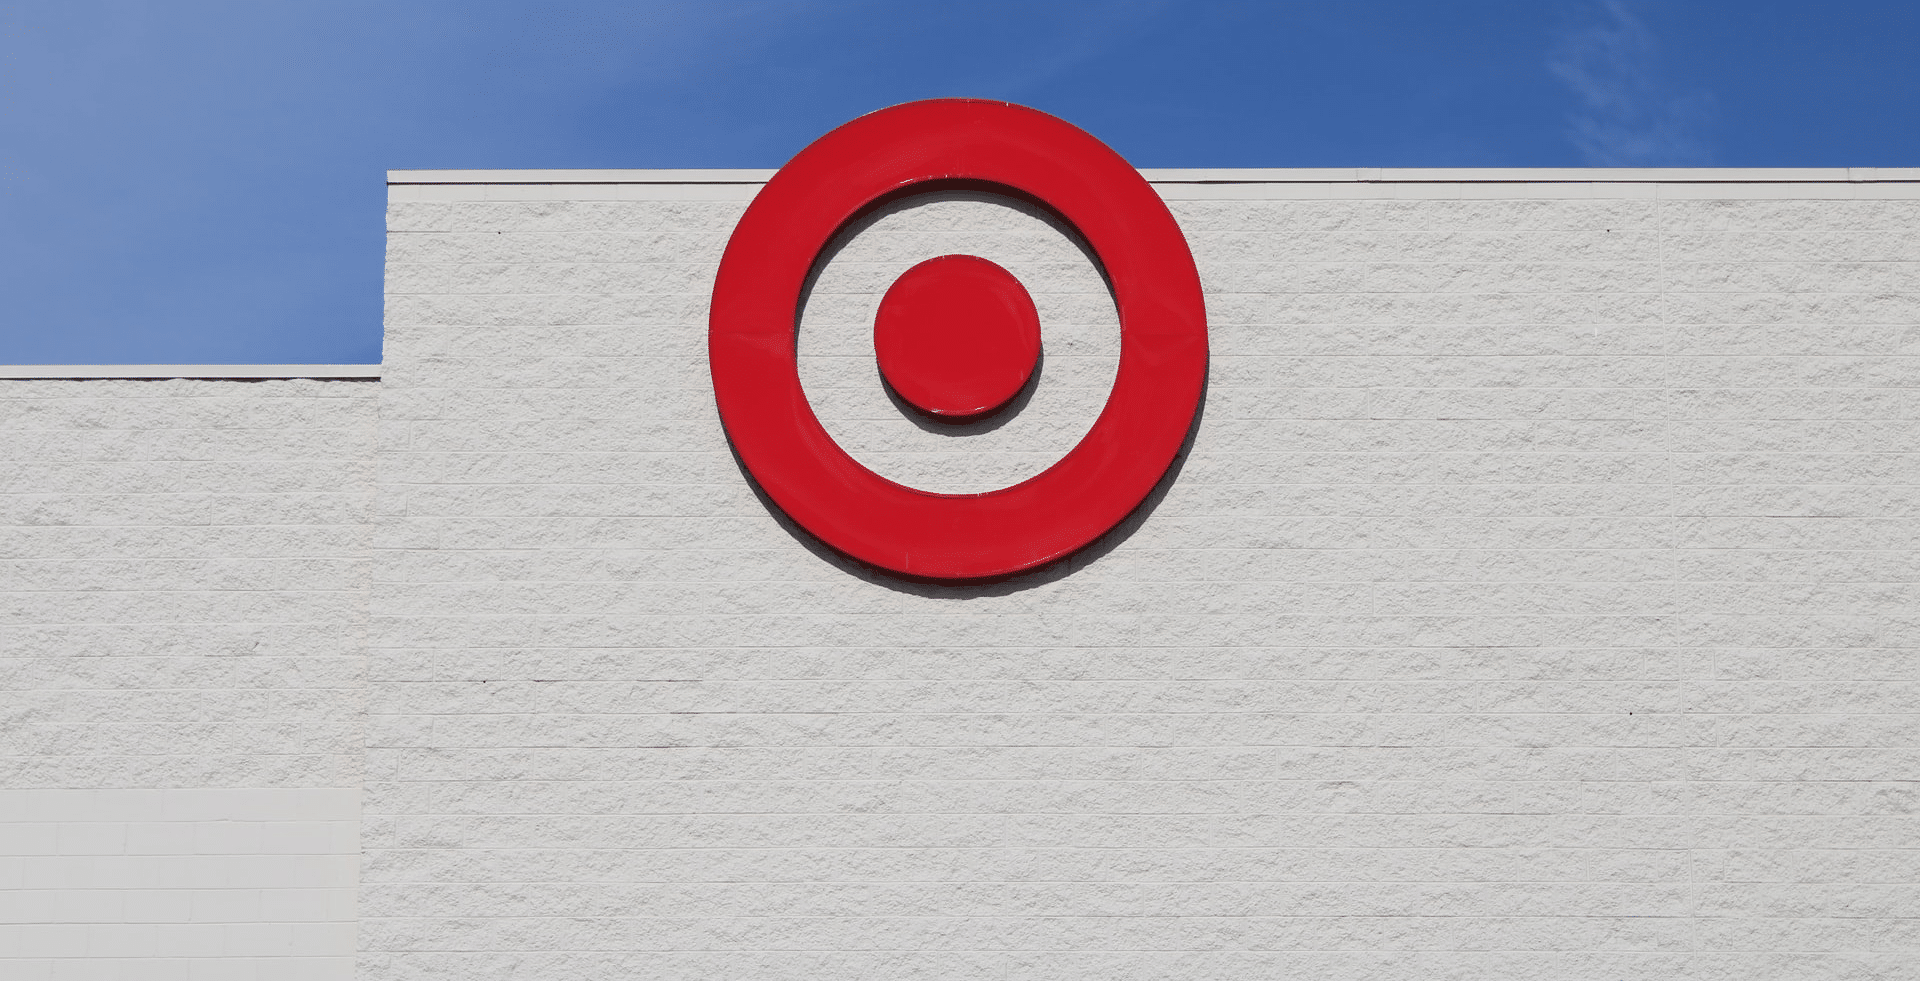 Target has managed to continuously evolve its customer loyalty strategy over the years creating the ability to fine tune its latest program.